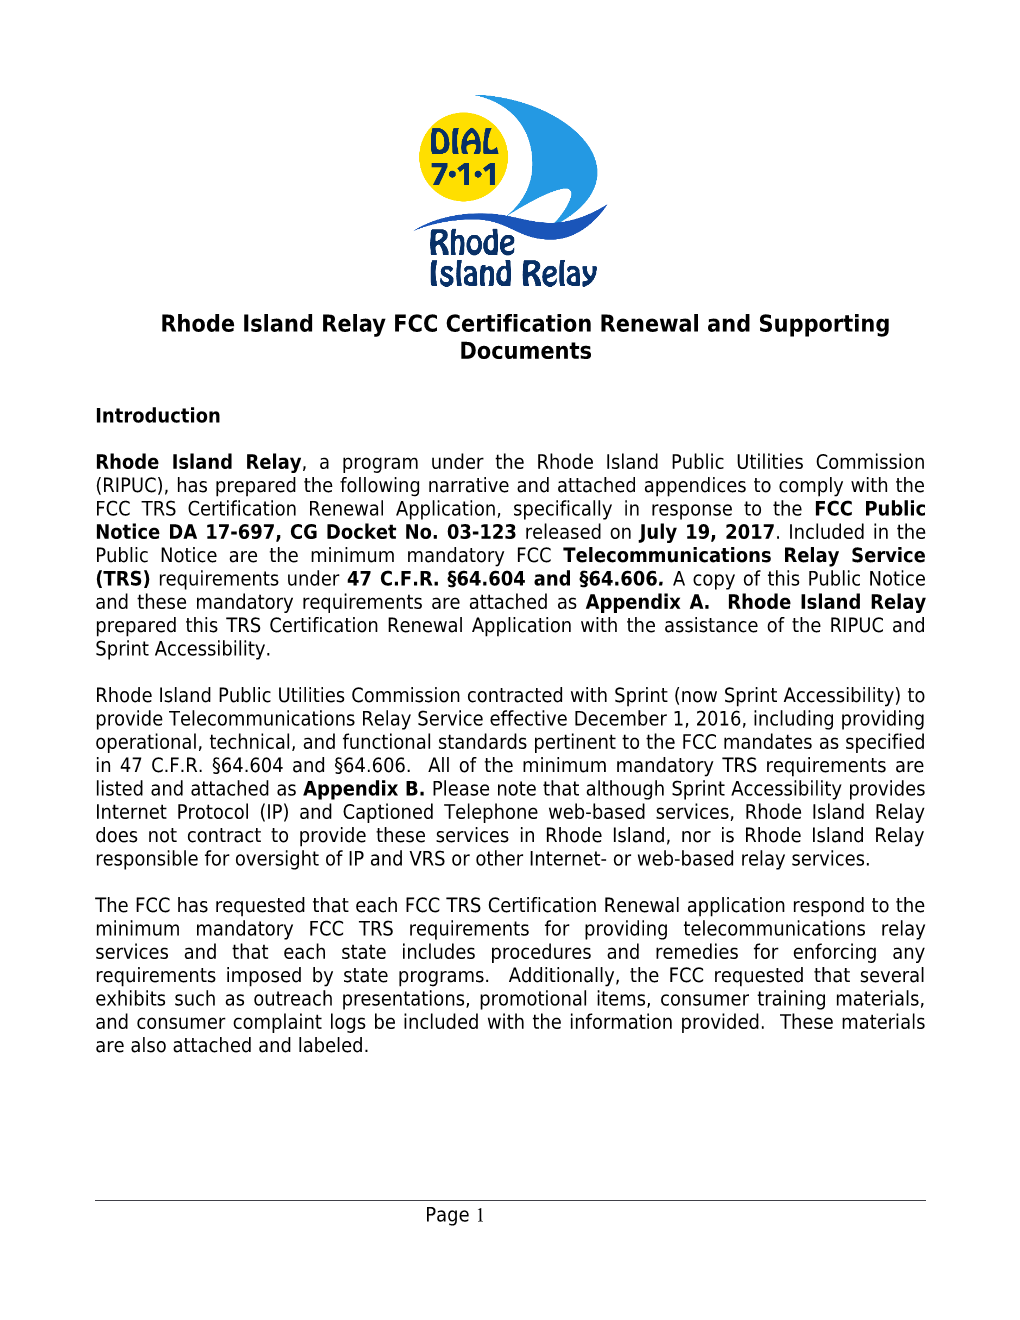 Rhode Island Relayfcc Certification Renewal and Supporting Documents